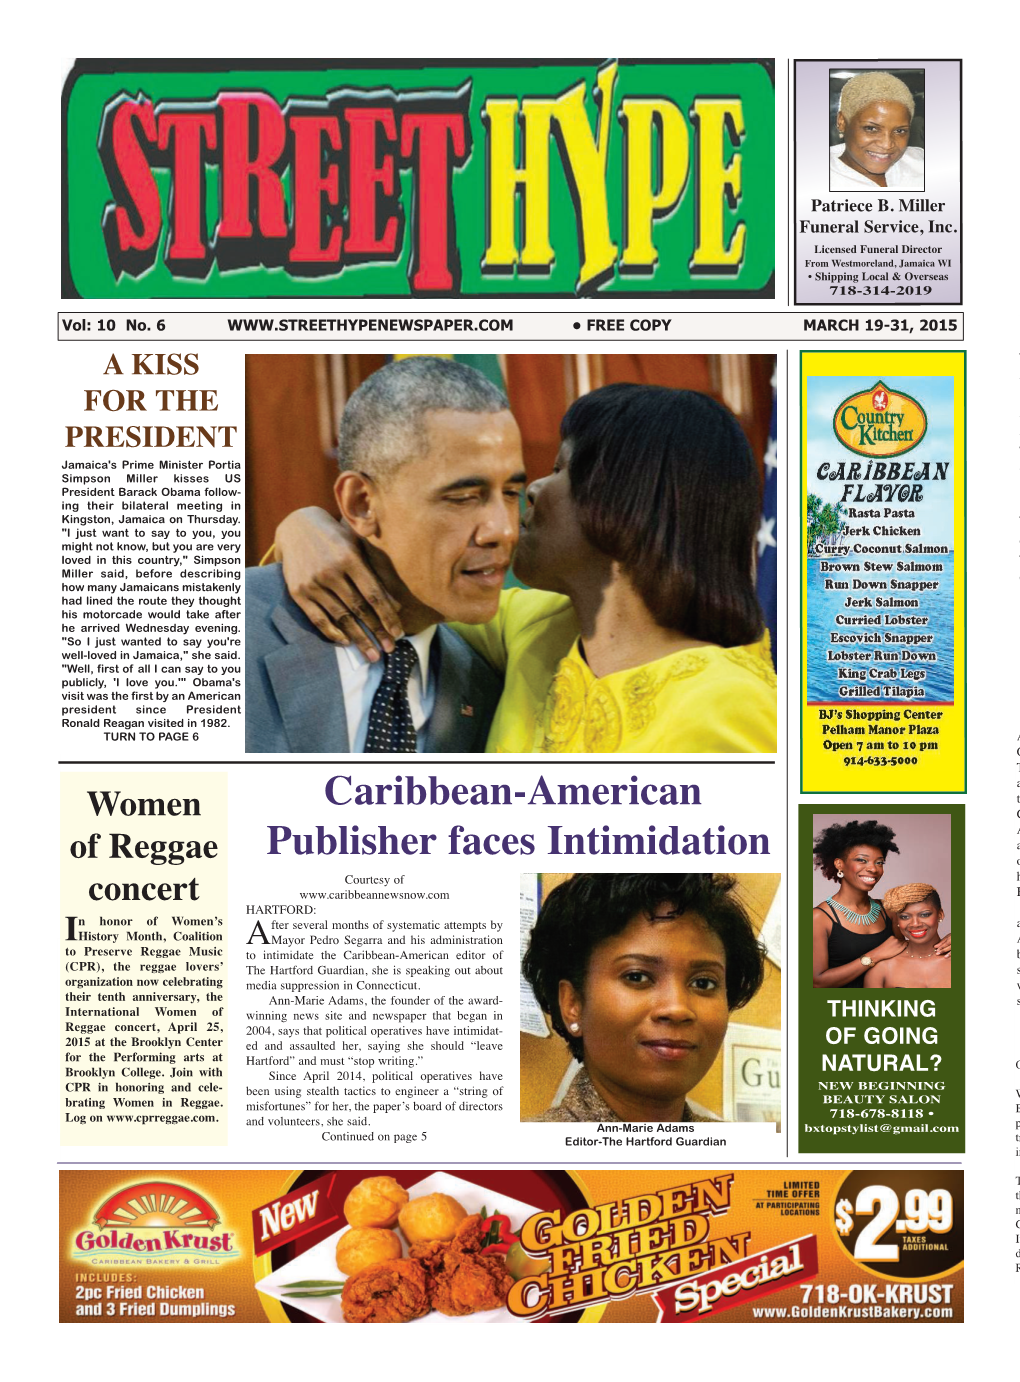 Caribbean-American Publisher Faces Intimidation